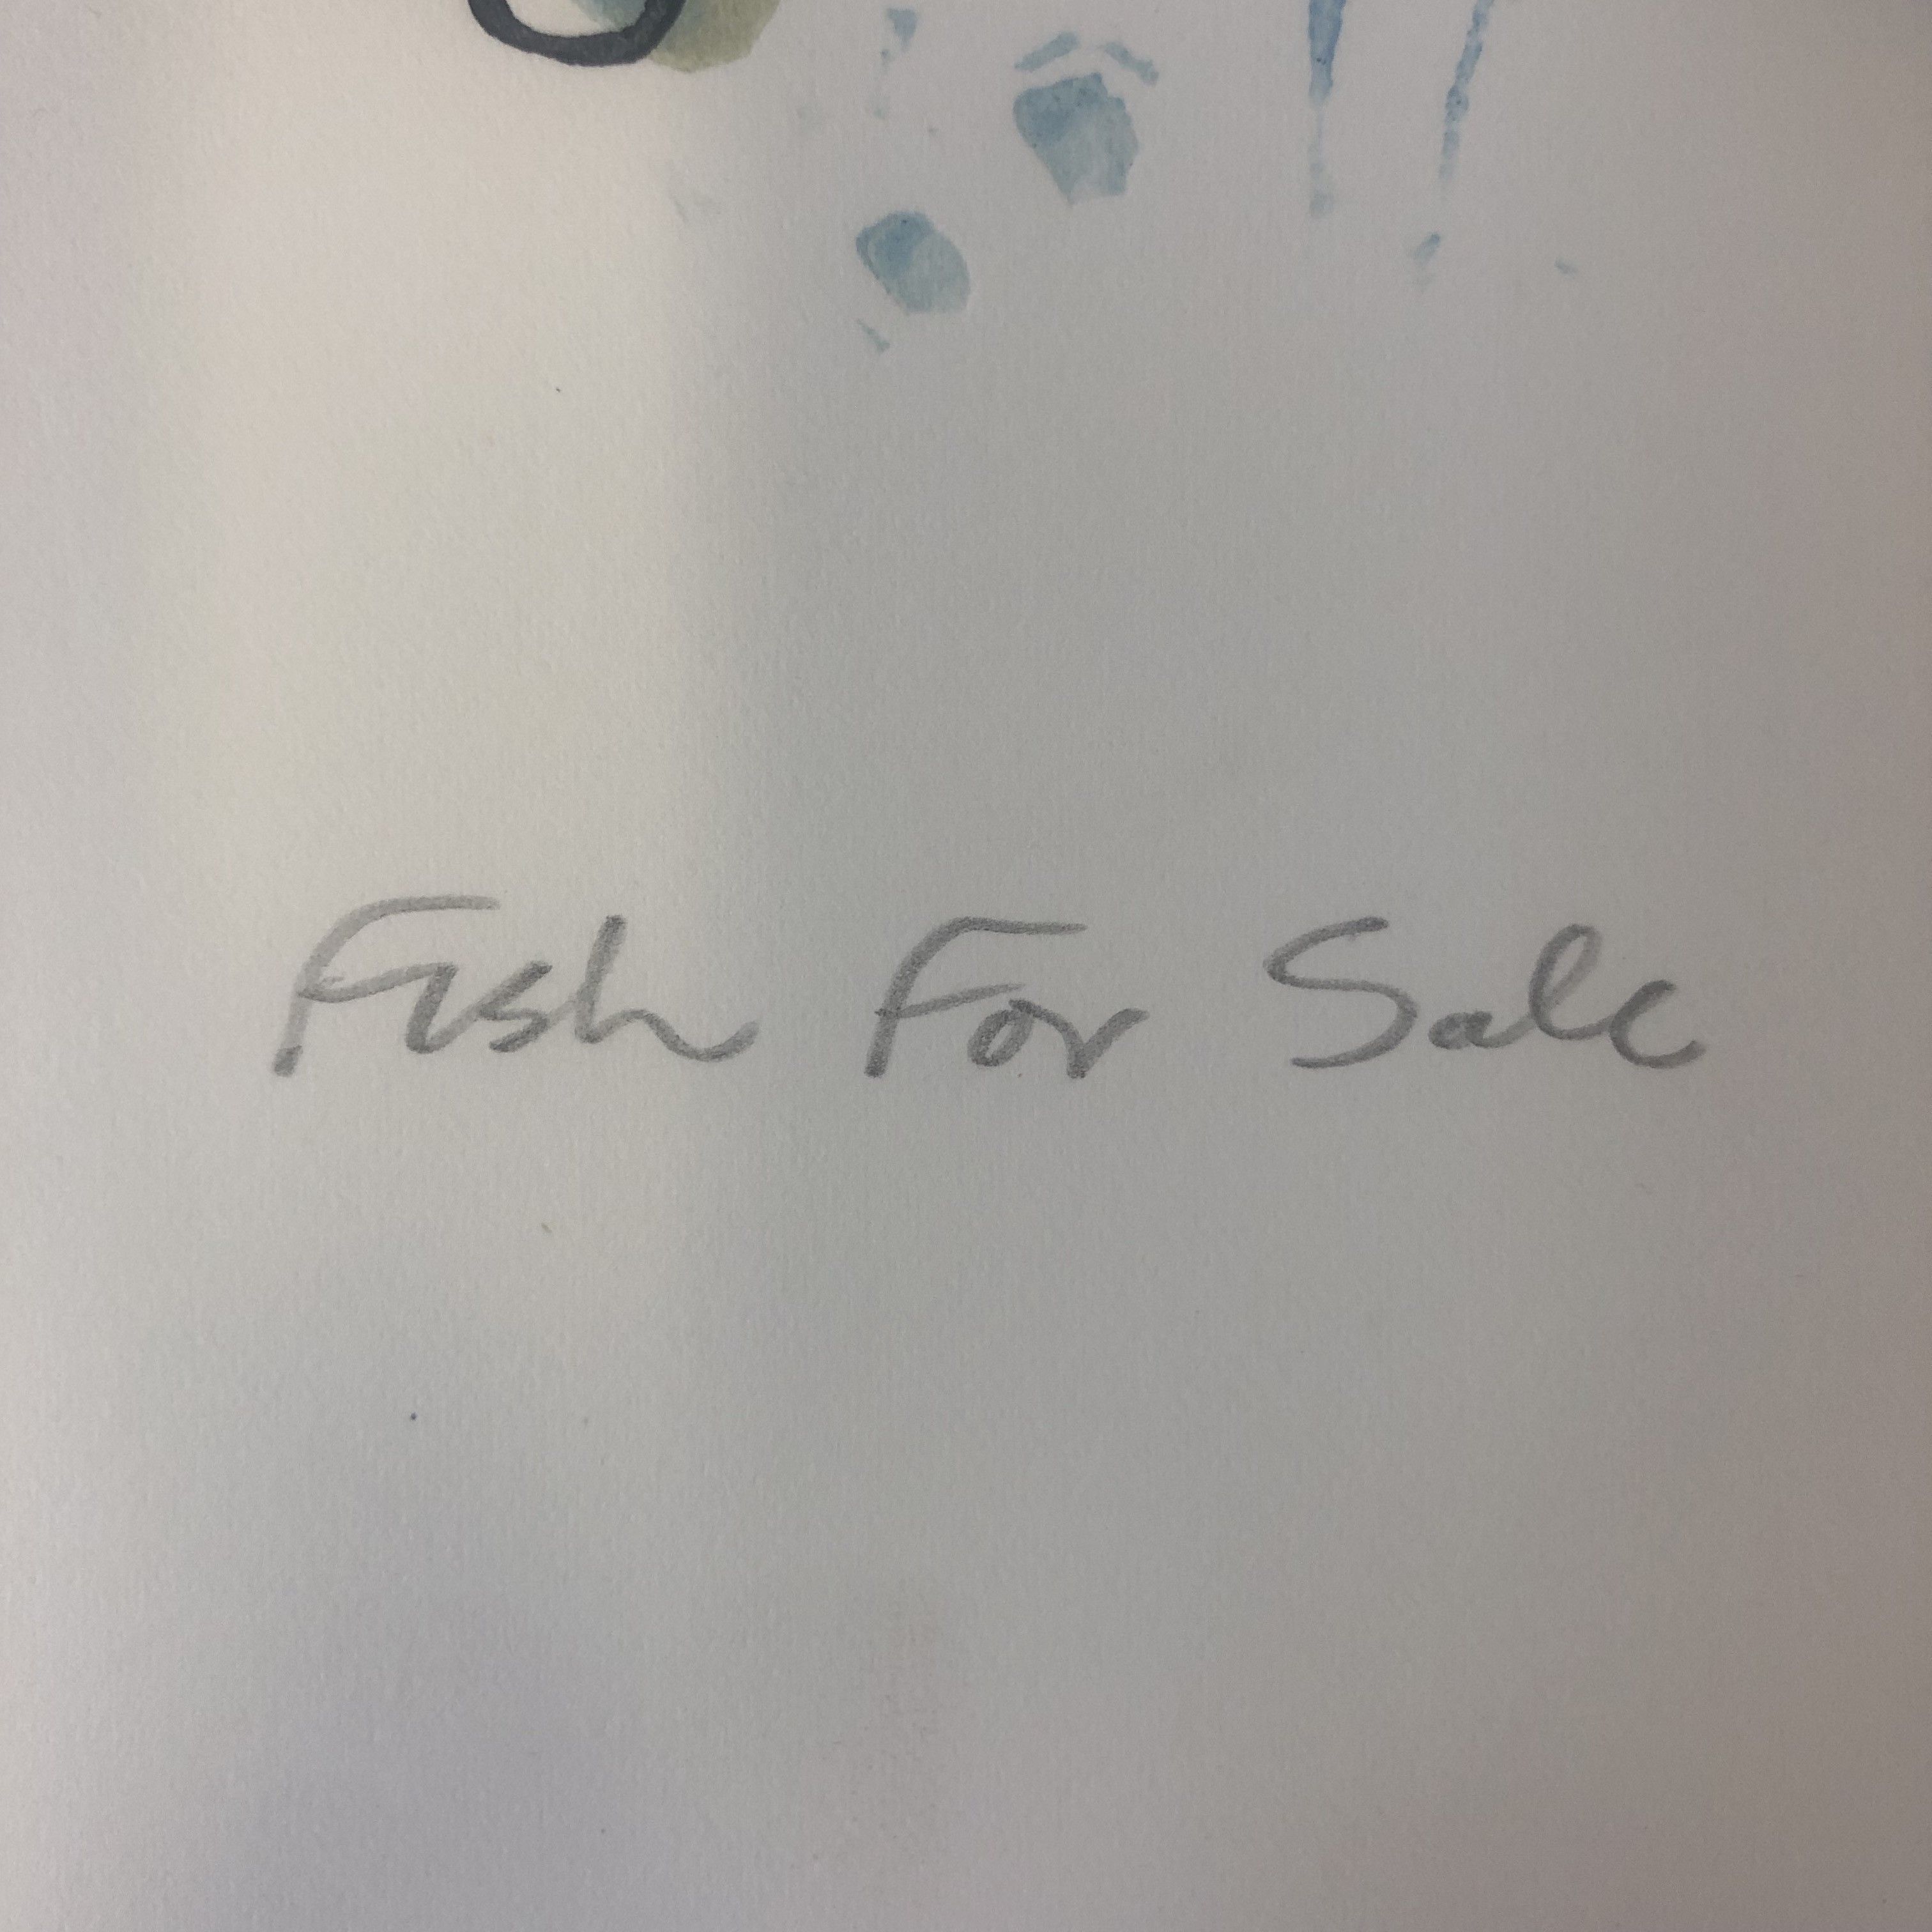 Fish For Sale by Colin Moore - Secondary Image